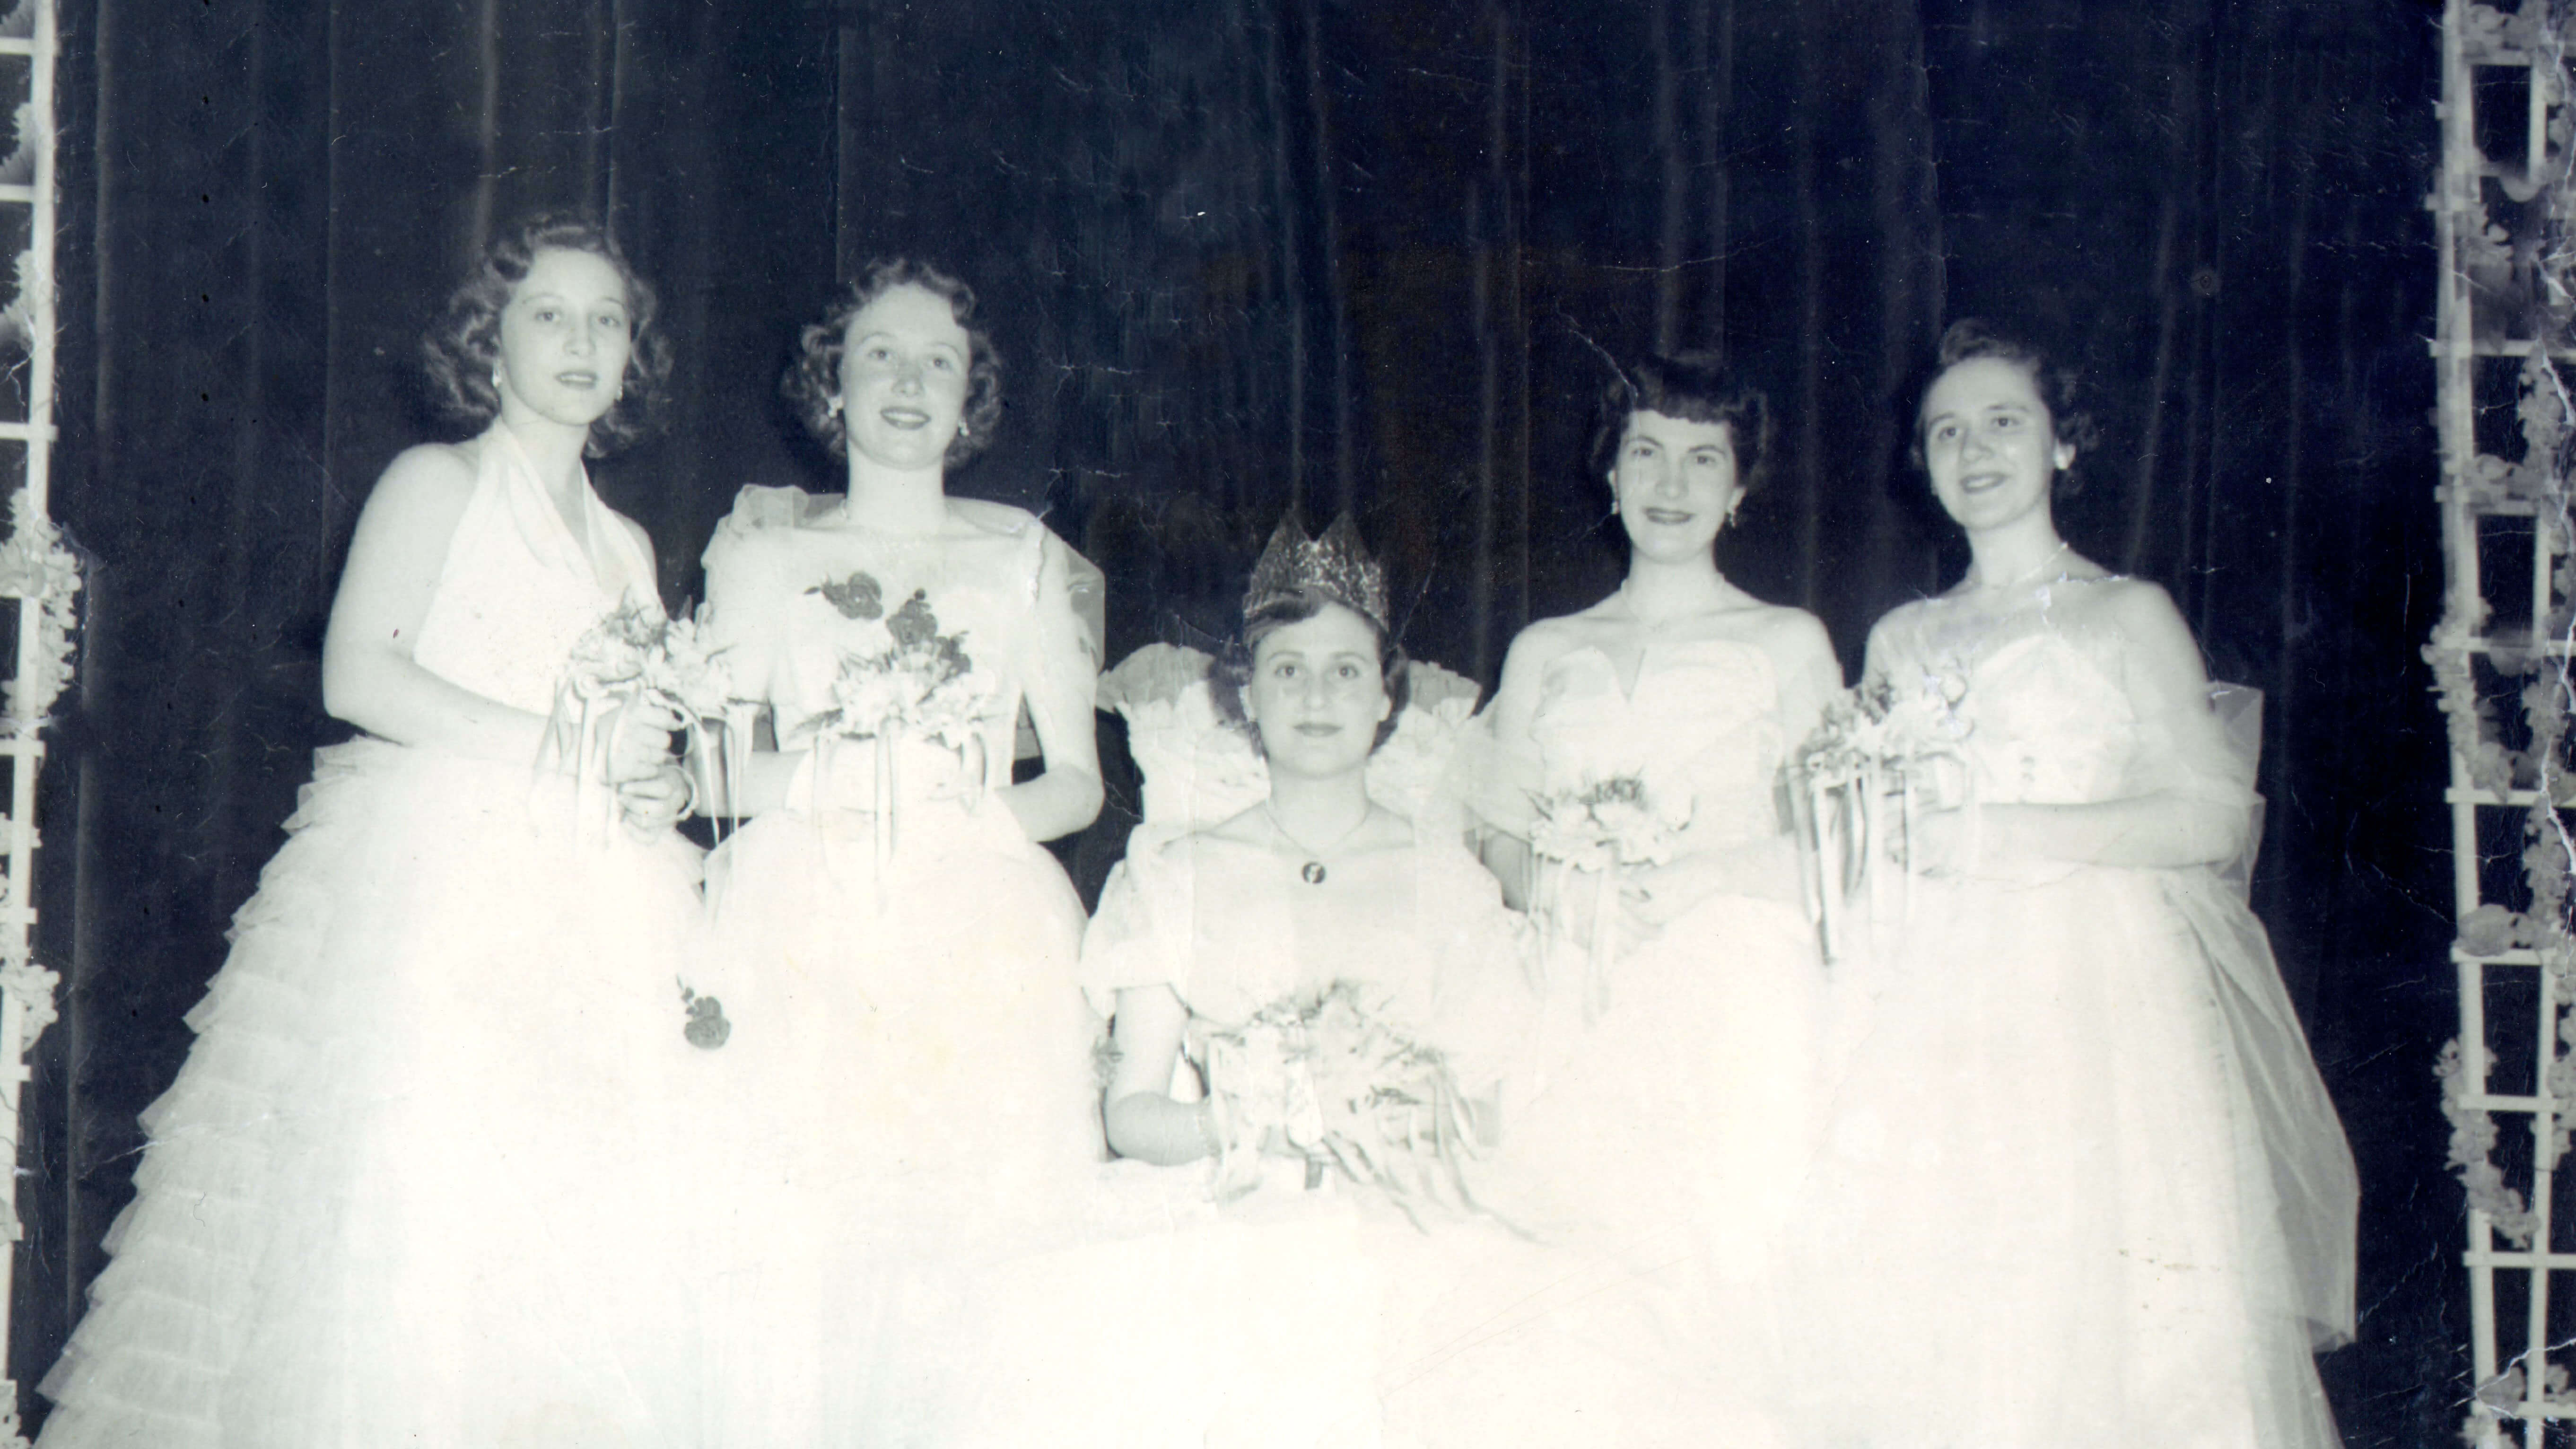 Five women smiling, dressed in white gowns while holding flowers